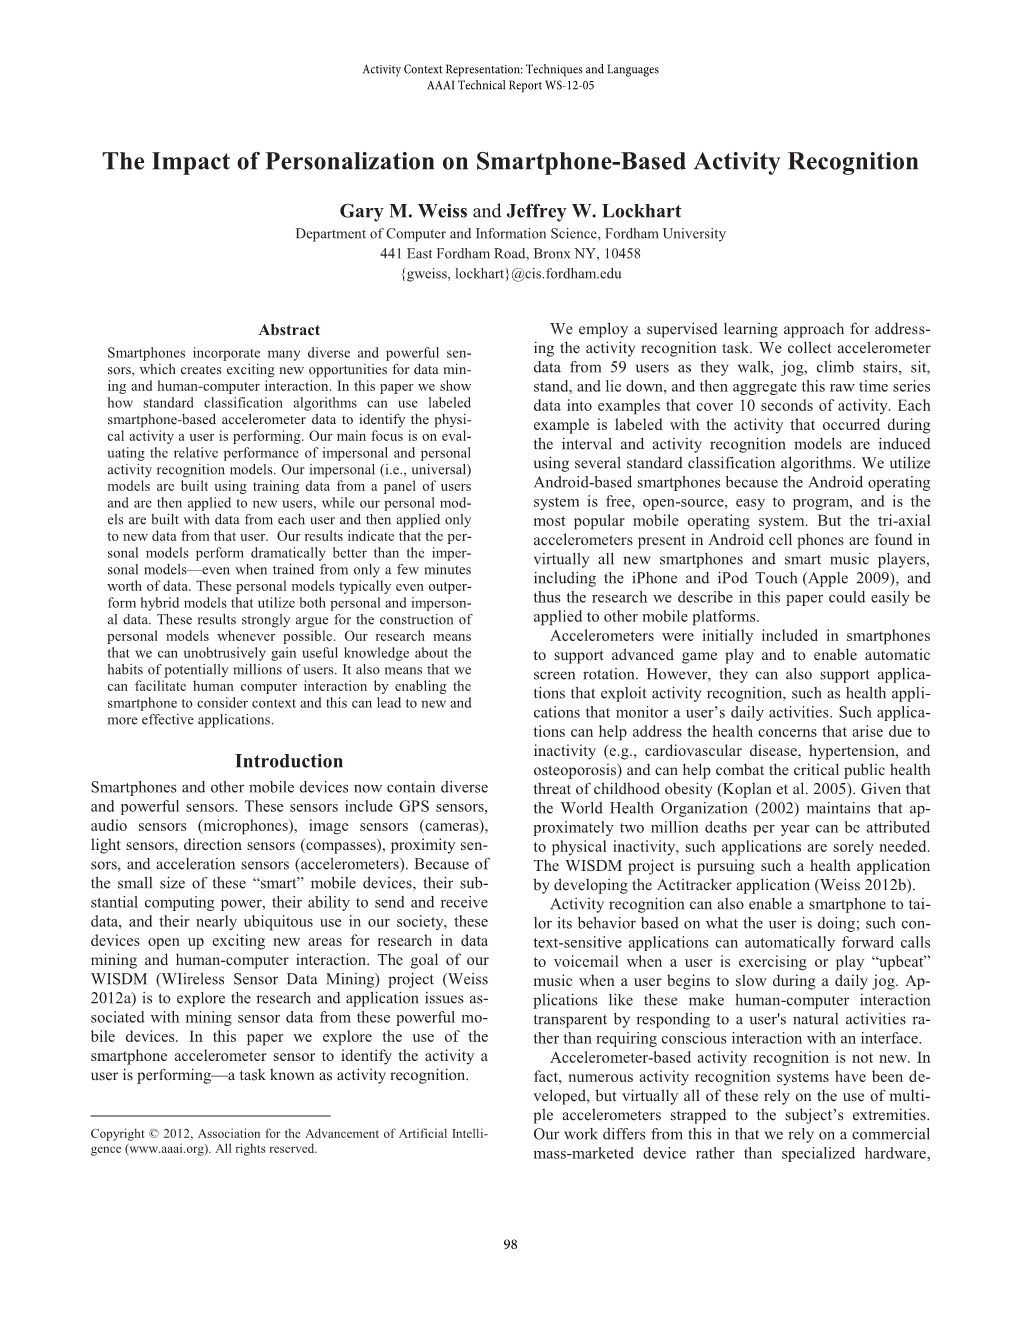 The Impact of Personalization on Smartphone-Based Activity Recognition